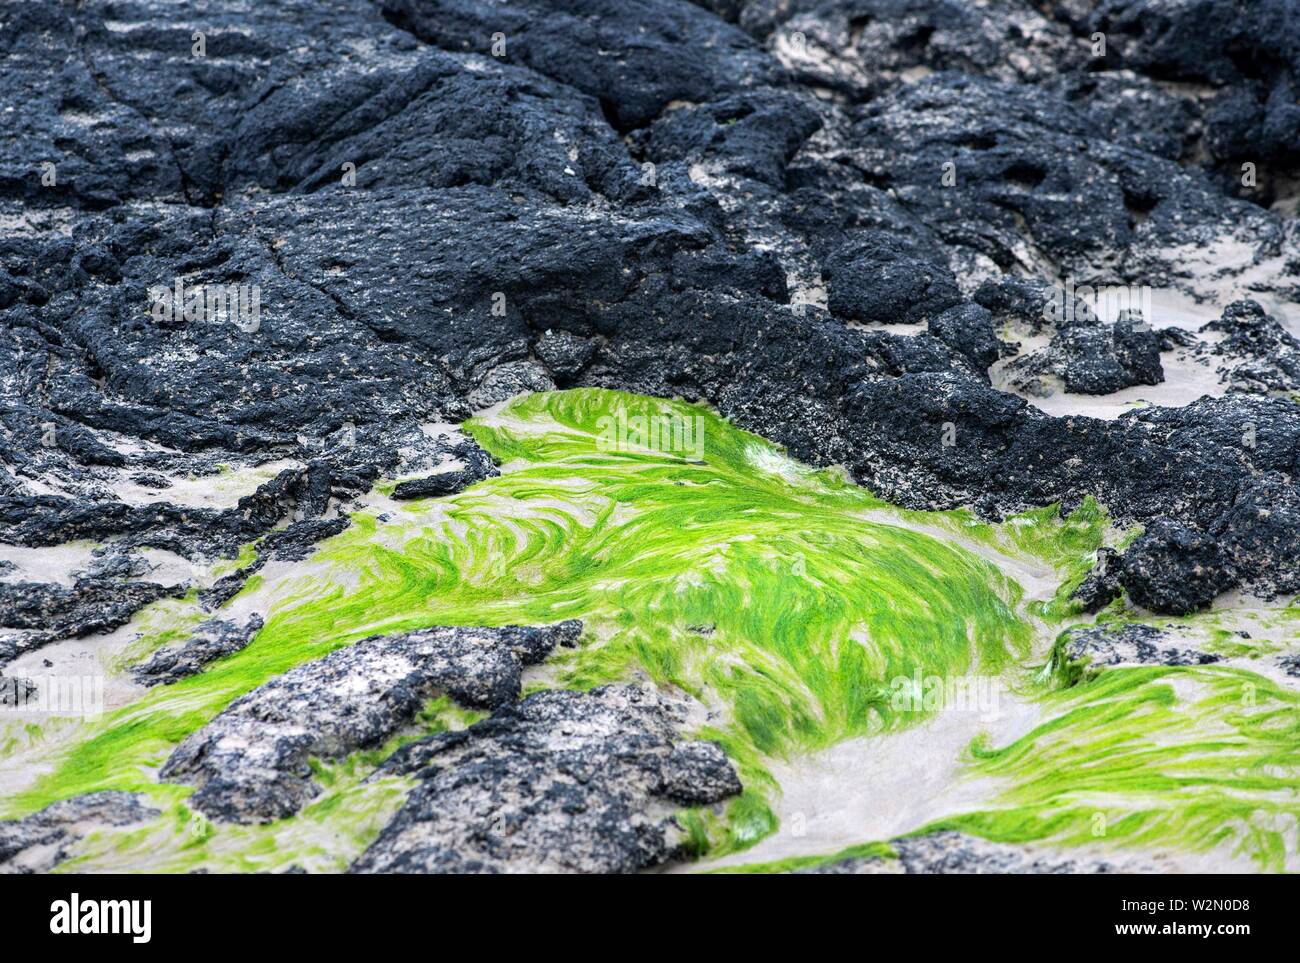 Black Pahoehoe lava textures contrasting with green sea weed, Isabela Island, Galapagos Islands, Ecuador. Stock Photo